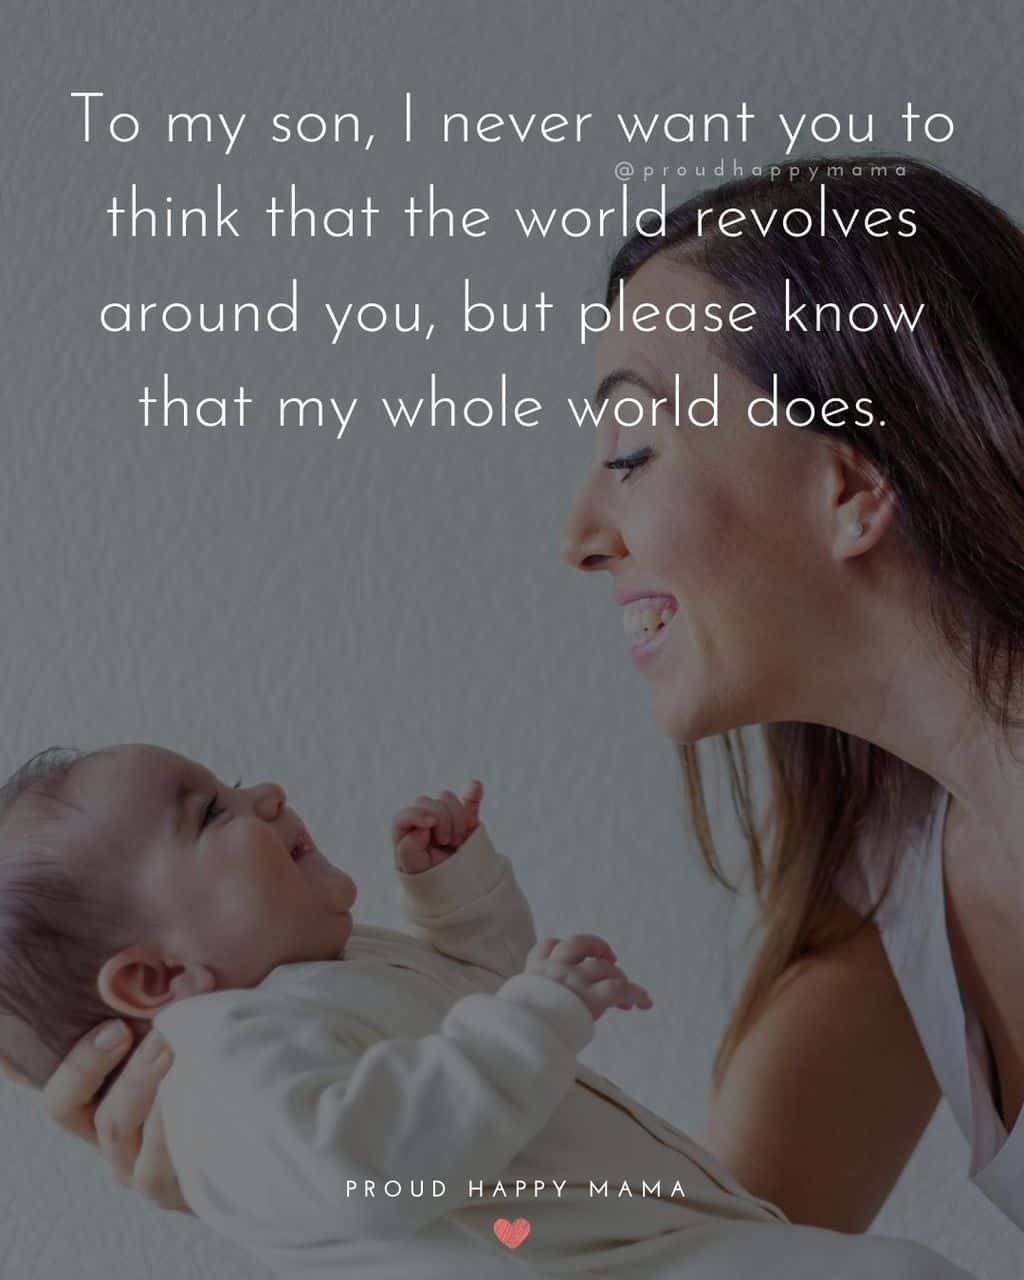 Son Quotes - To my son, I never want you to think that the world revolves around you, but please know that my whole world